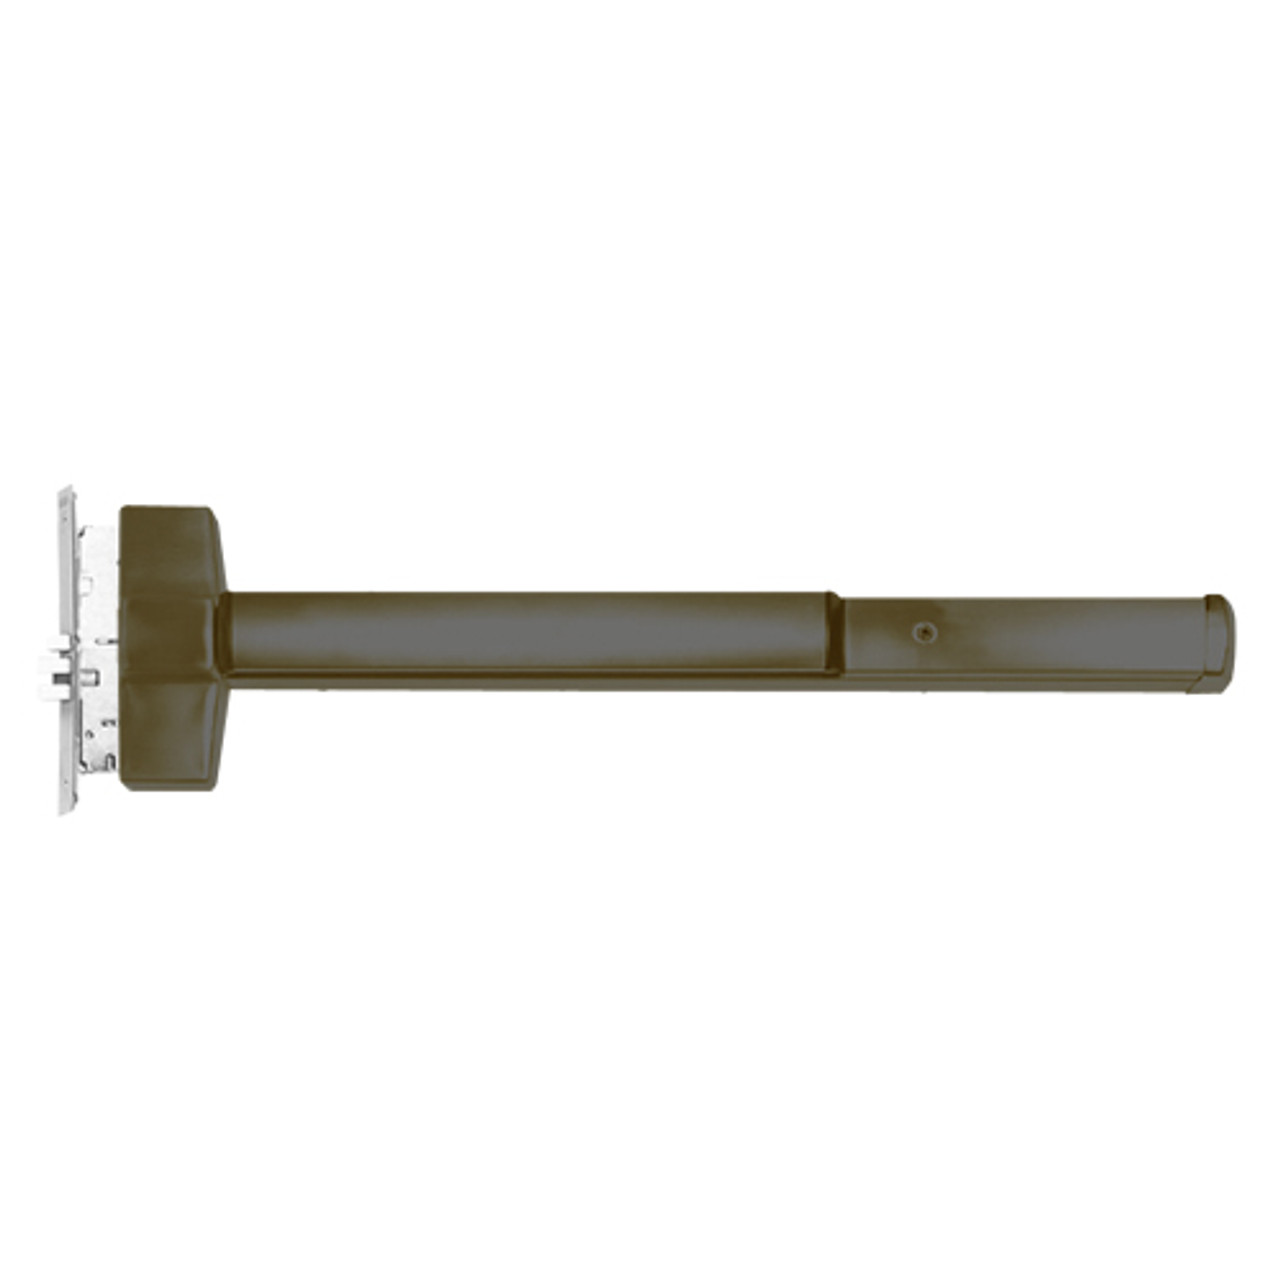 ED5600T-613-LHR Corbin ED5600 Series Non Fire Rated Mortise Exit Device in Oil Rubbed Bronze Finish